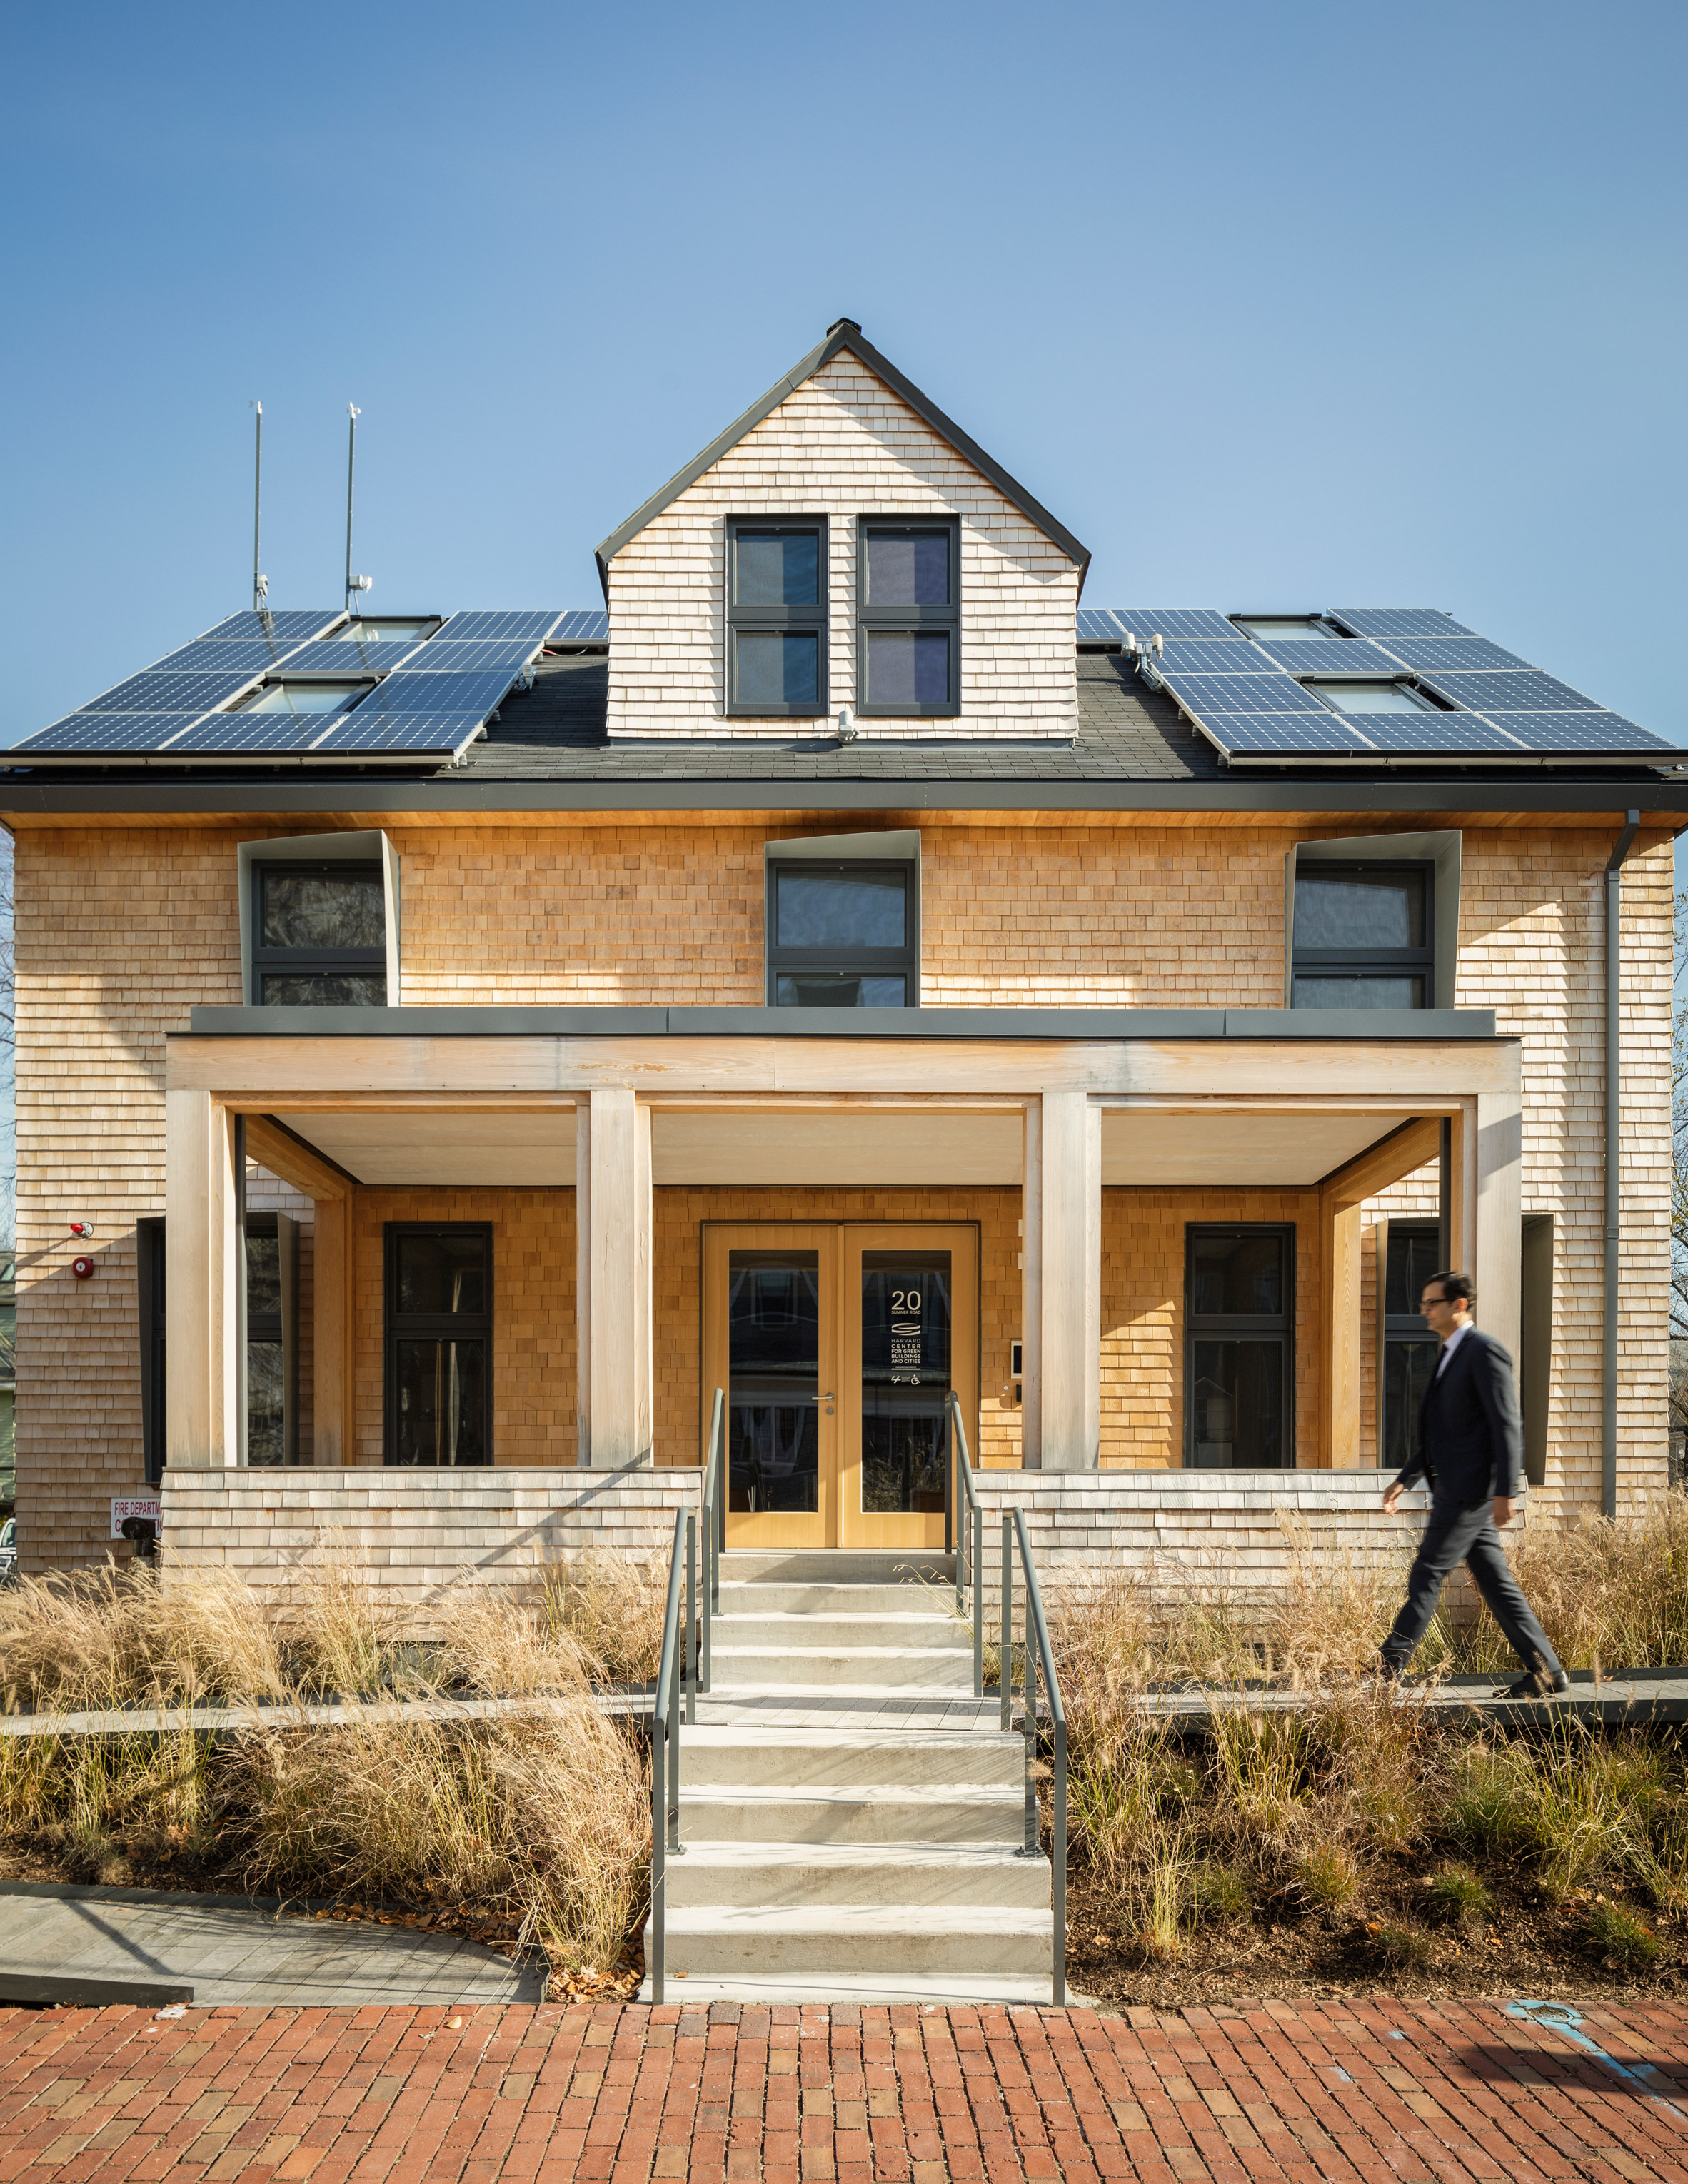 HouseZero at Harvard by Snohetta, a climate change resilient home